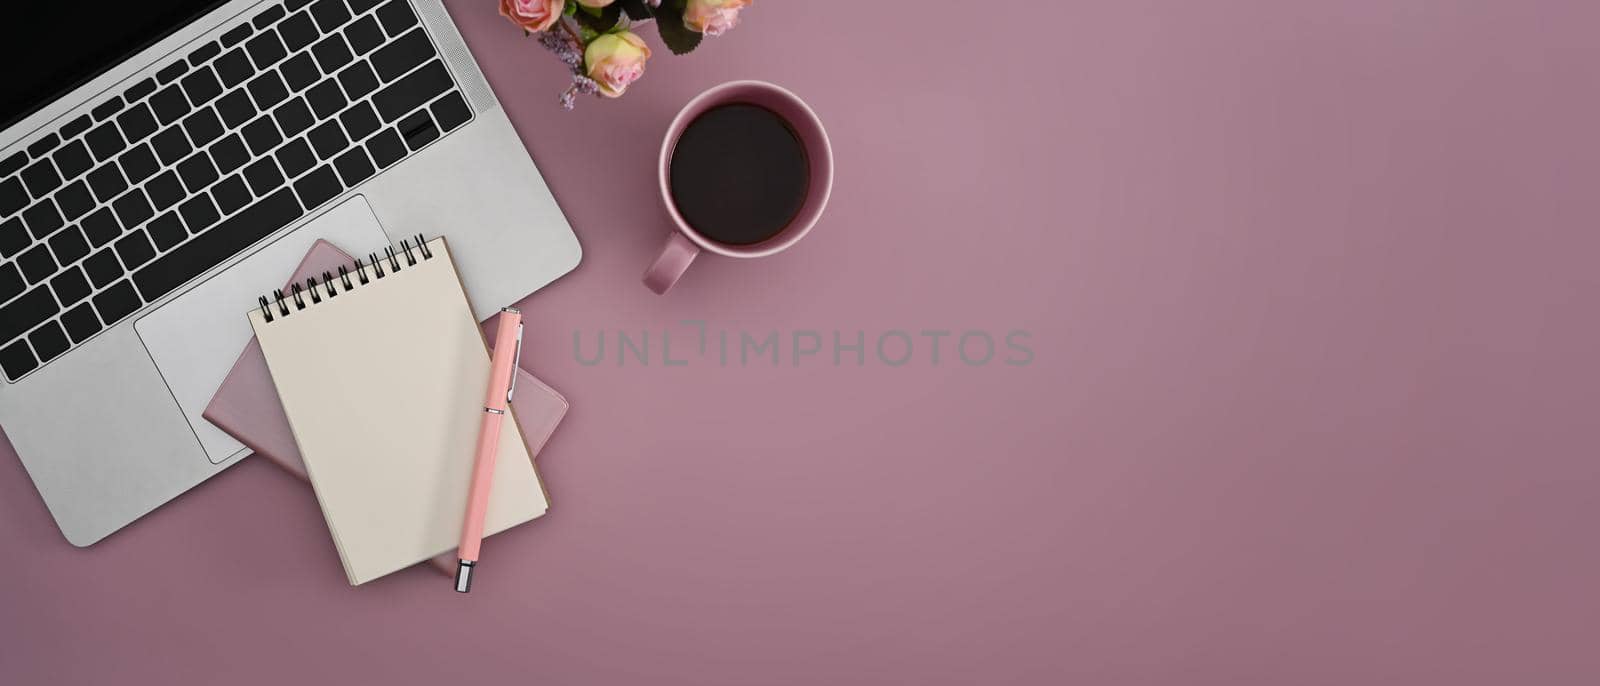 Flat lay laptop computer, coffee cup and notebook on pink background with copy space. by prathanchorruangsak